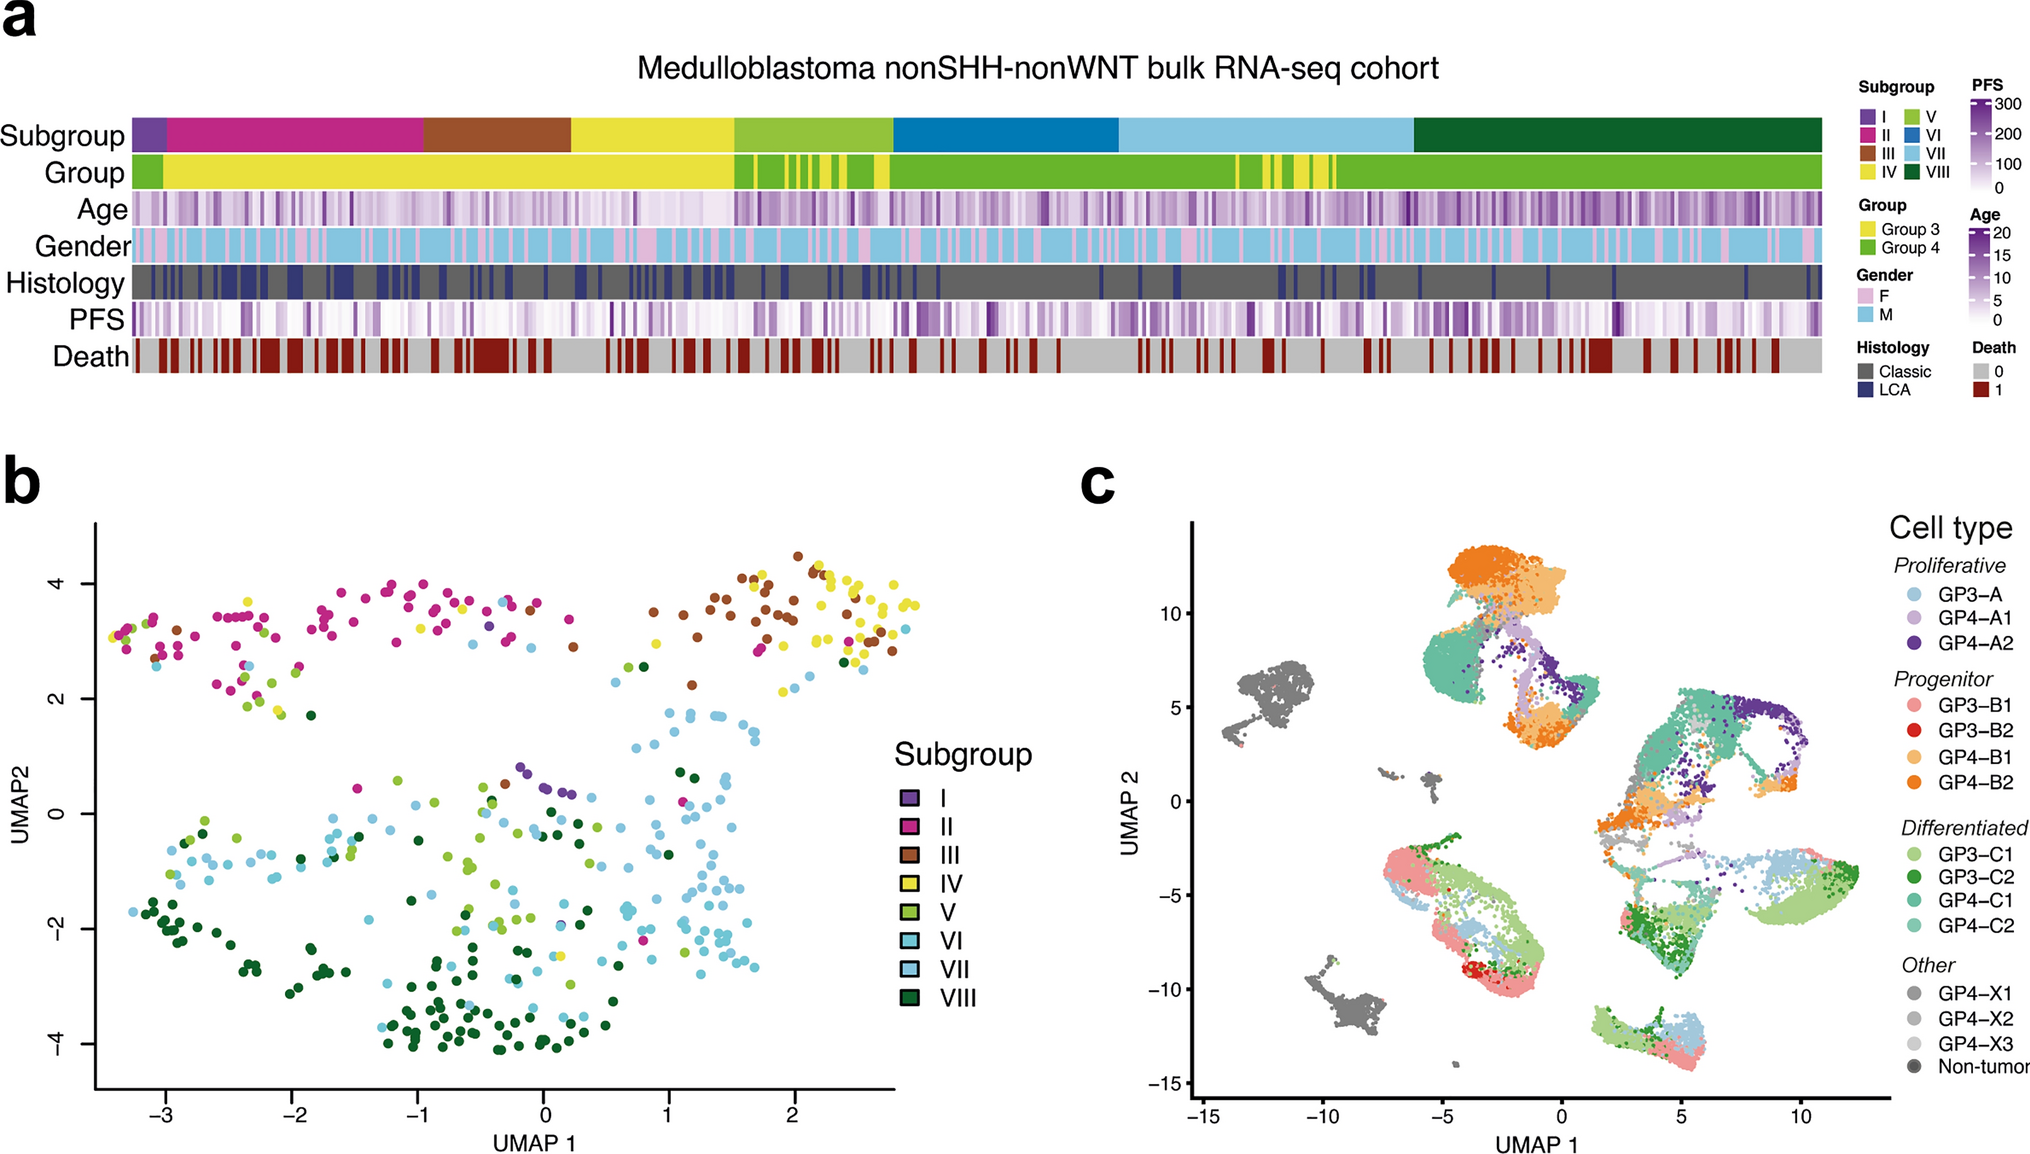 Clinically unfavorable transcriptome subtypes of non-WNT/non-SHH medulloblastomas are associated with a predominance in proliferating and progenitor-like cell subpopulations